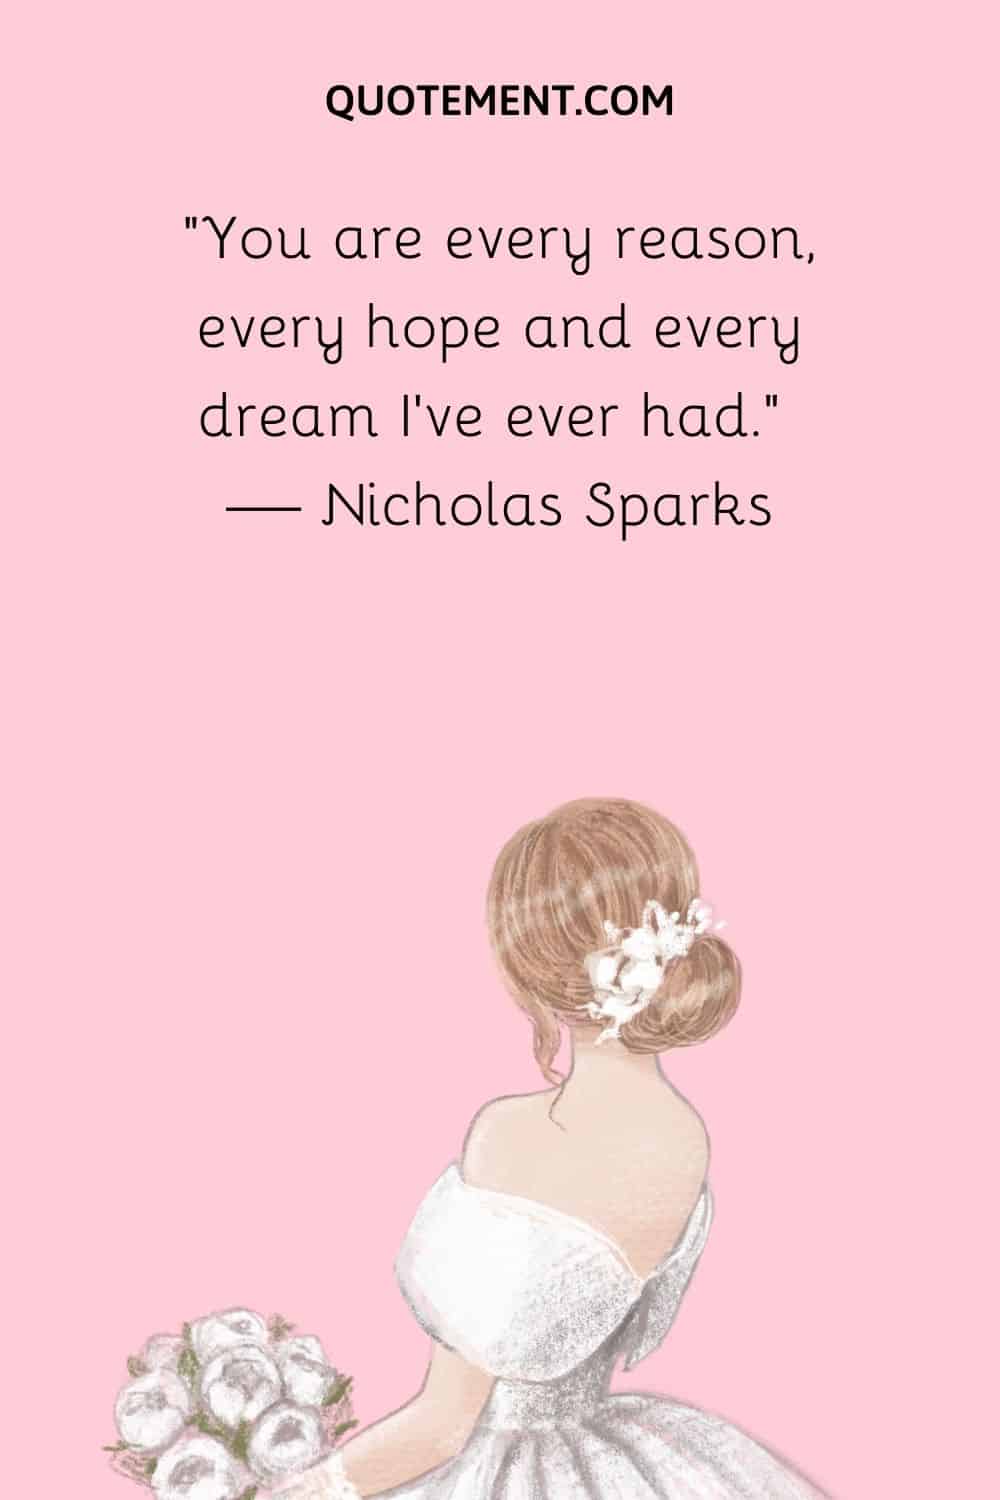 “You are every reason, every hope and every dream I’ve ever had.” — Nicholas Sparks